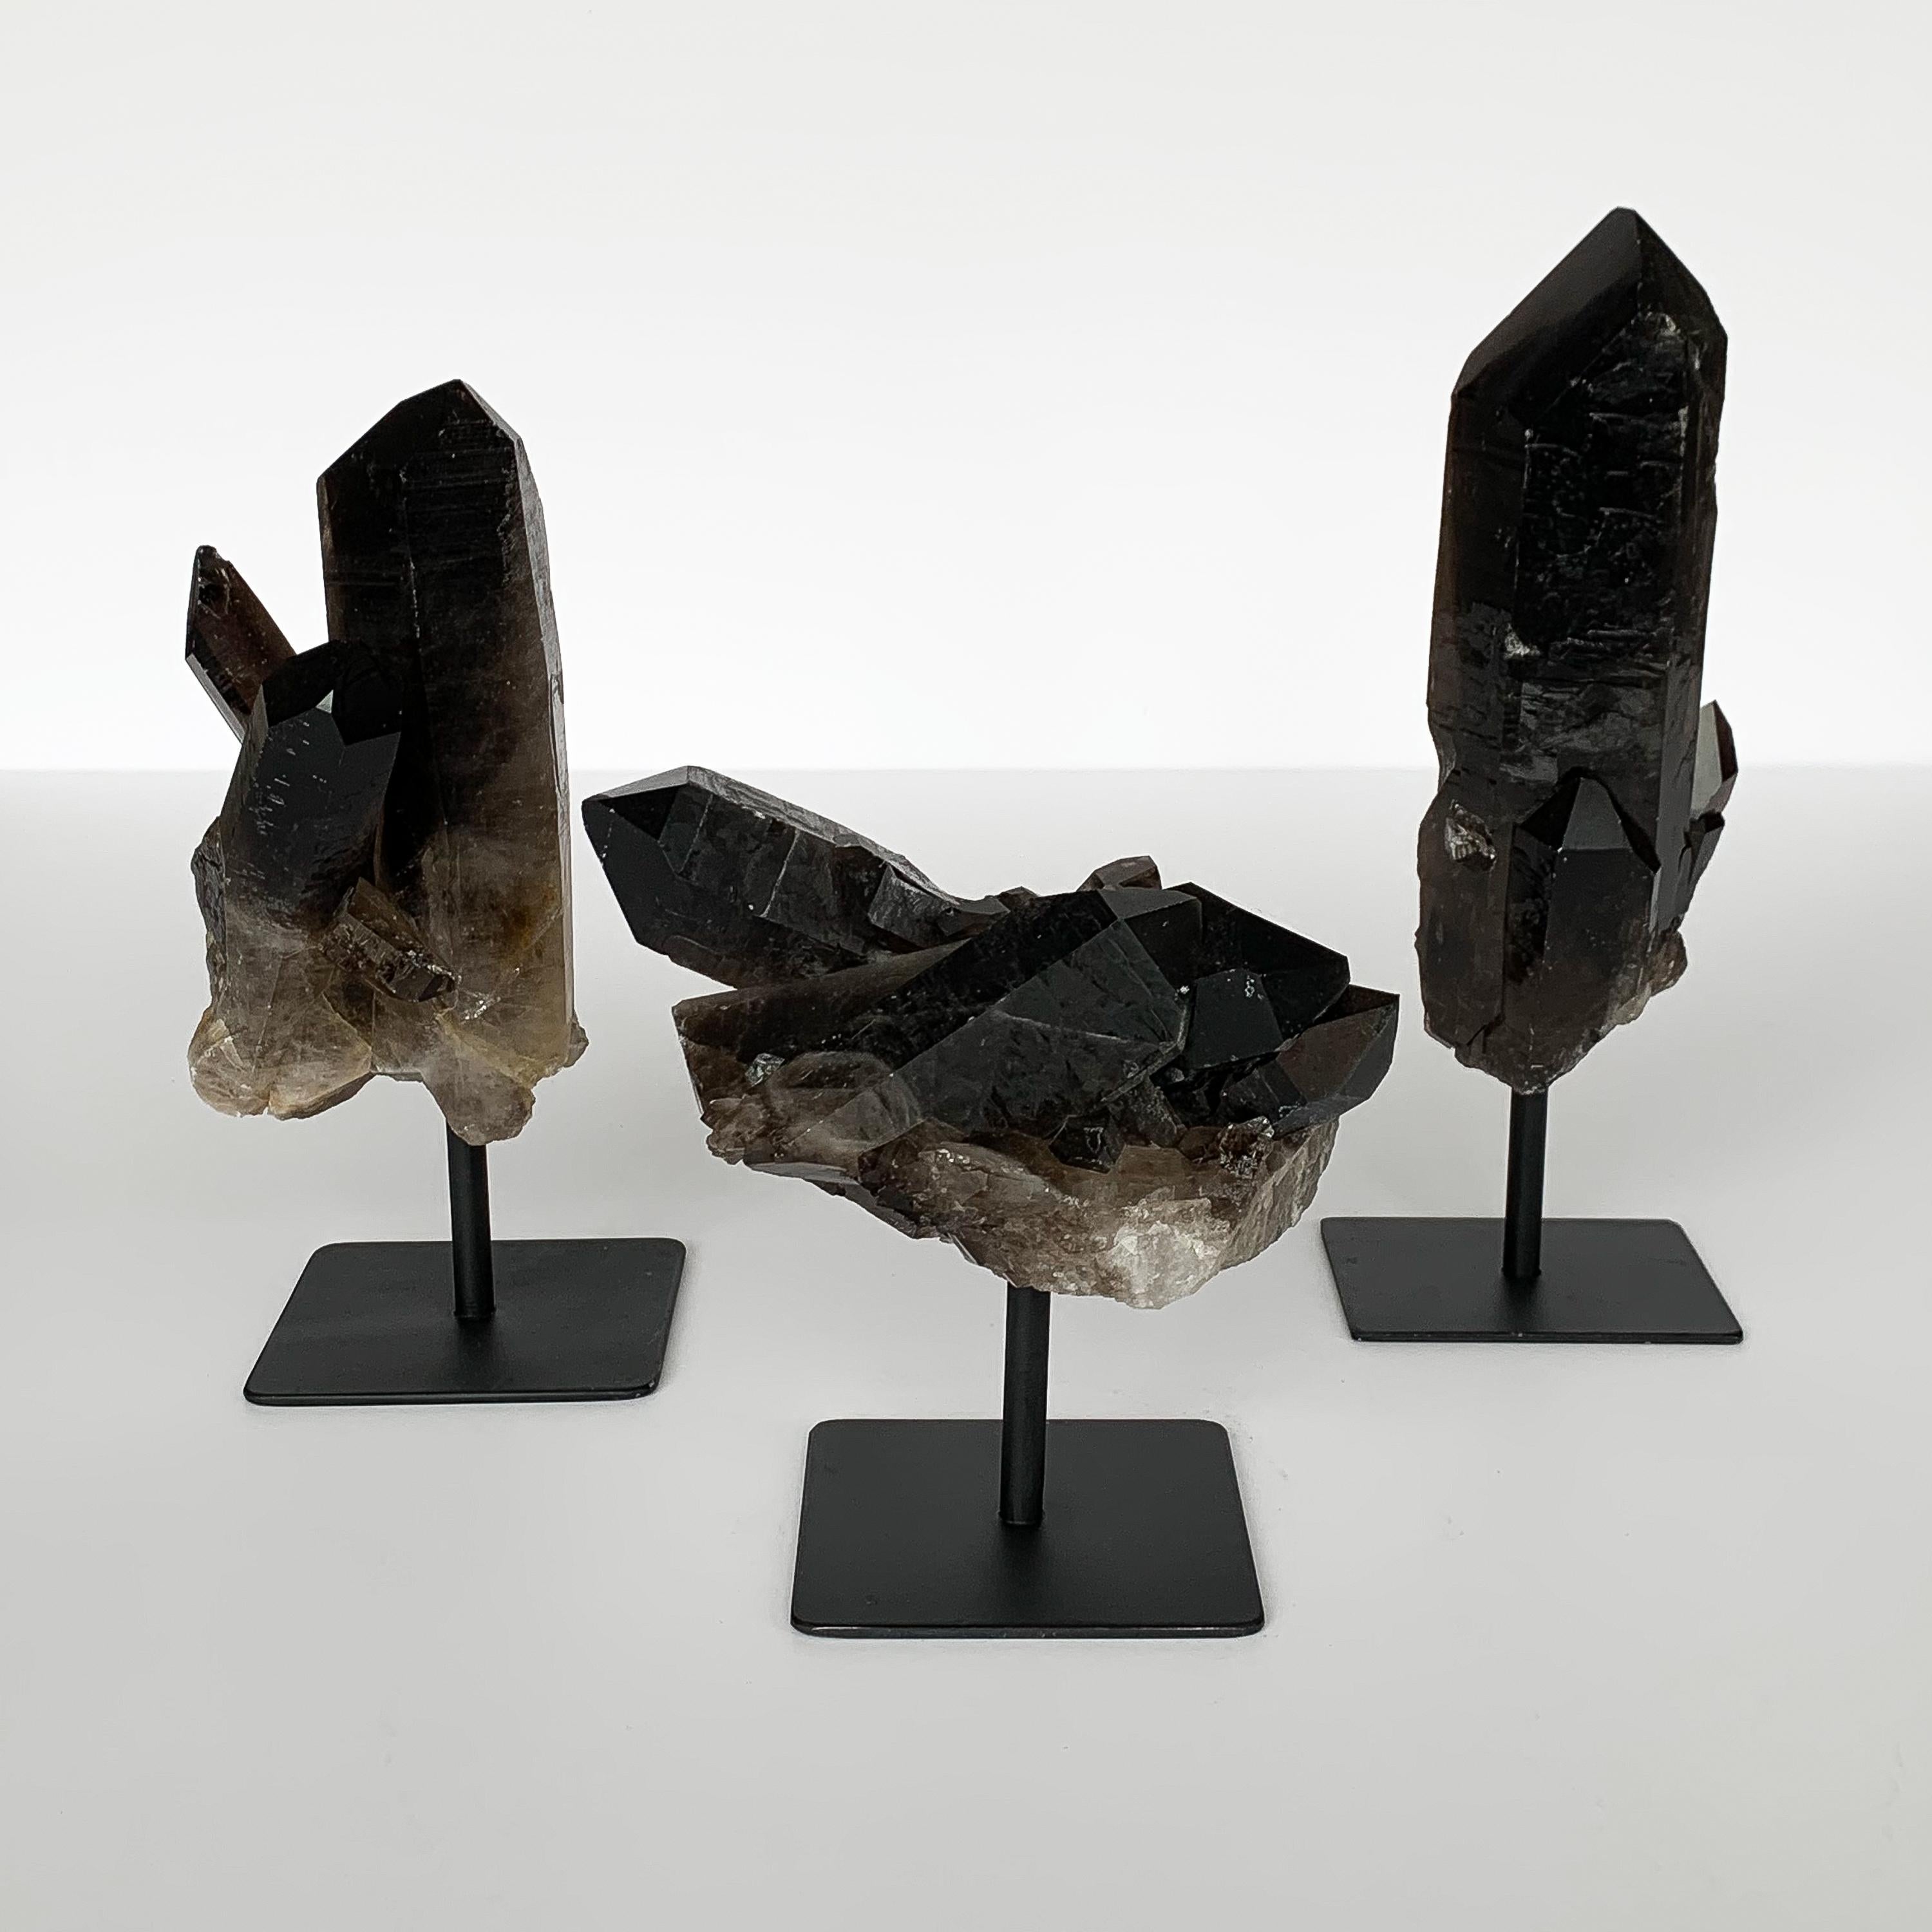 Set of three natural smoky quartz crystal specimens mounted to painted black metal stands.

Measures: Left - 9.75